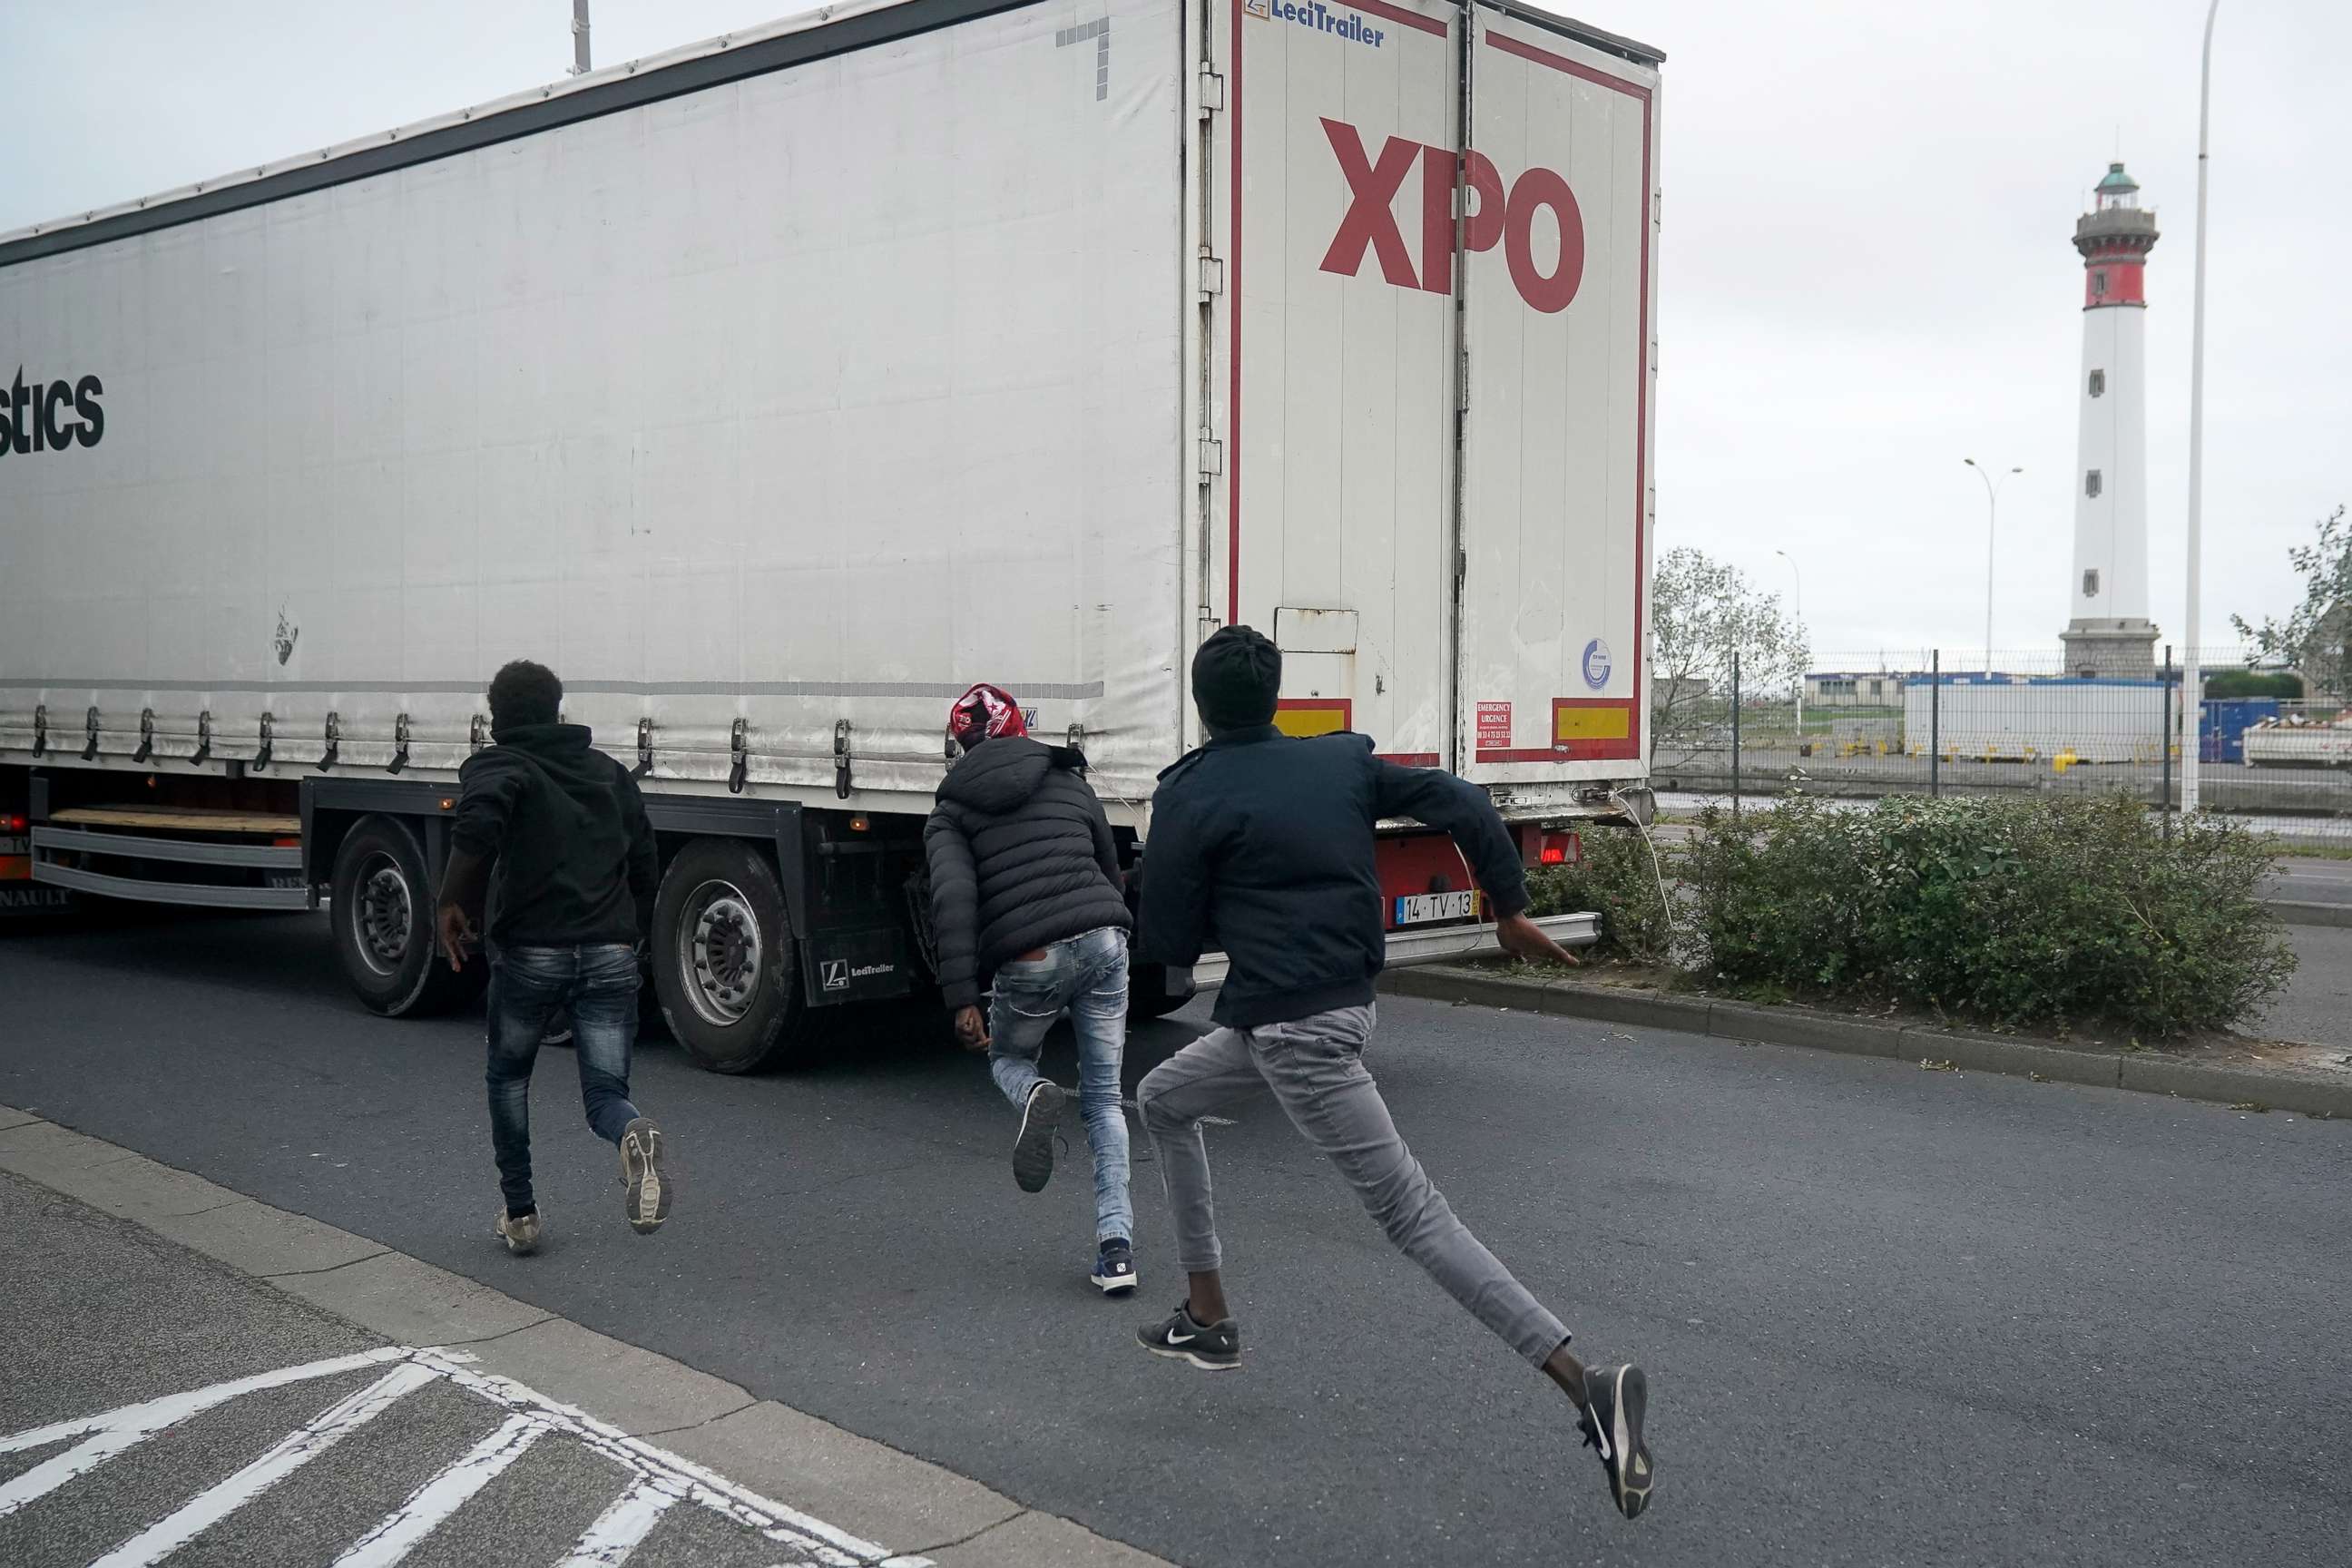 PHOTO: Migrants try to board a truck at Ouistreham ferry port in the hope of reaching the U.K. on Sept. 12, 2018, in Ouistreham, France.